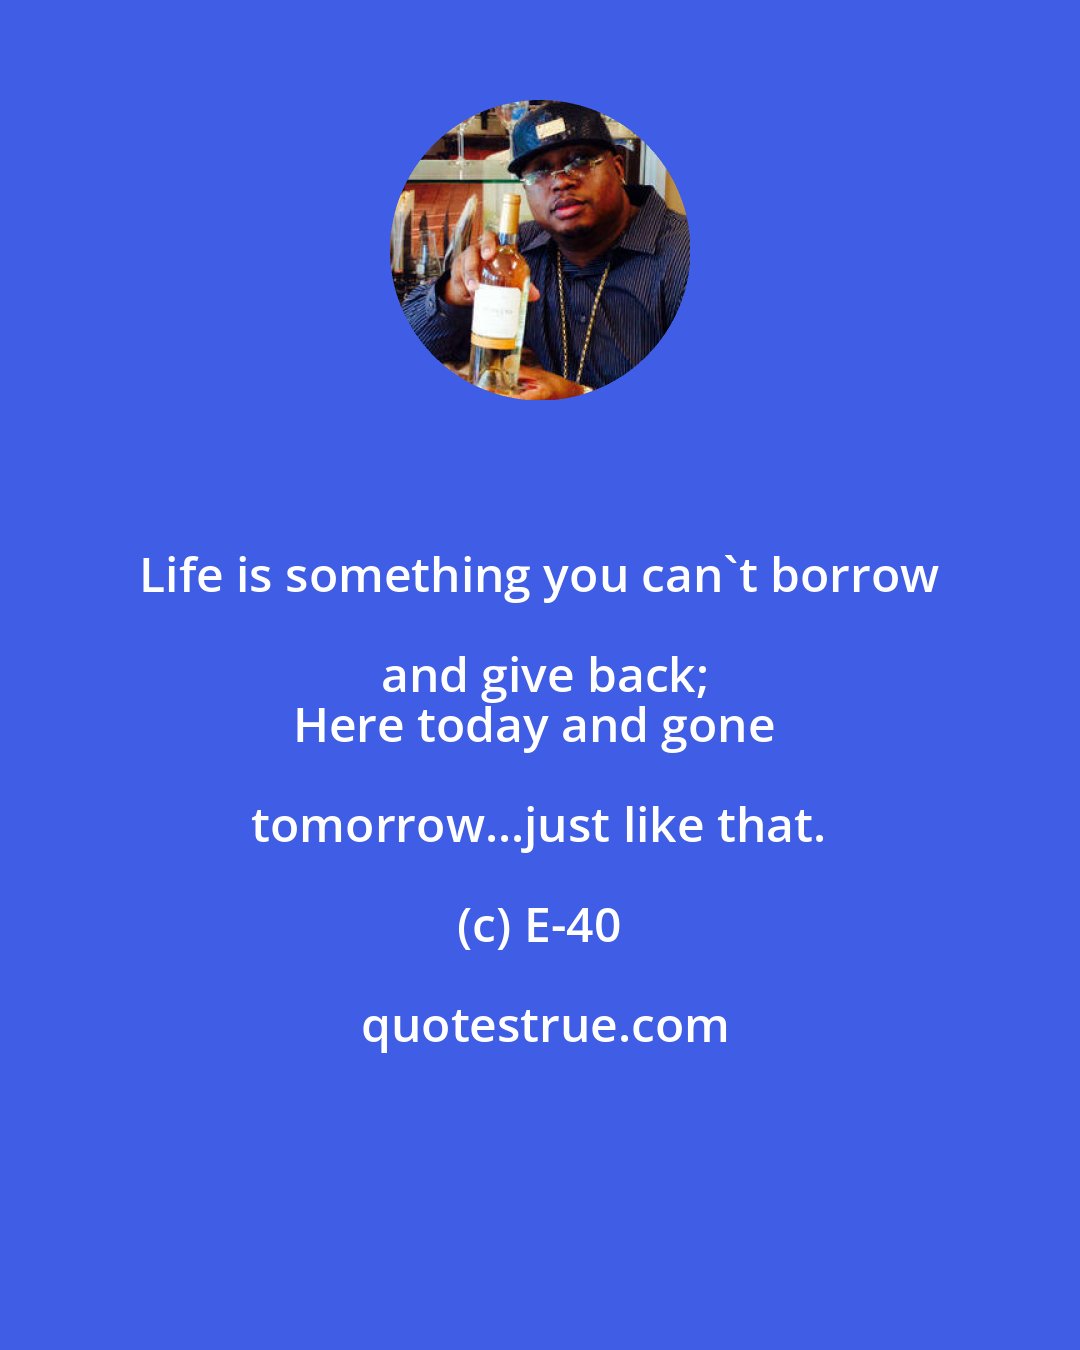 E-40: Life is something you can't borrow and give back;
Here today and gone tomorrow...just like that.